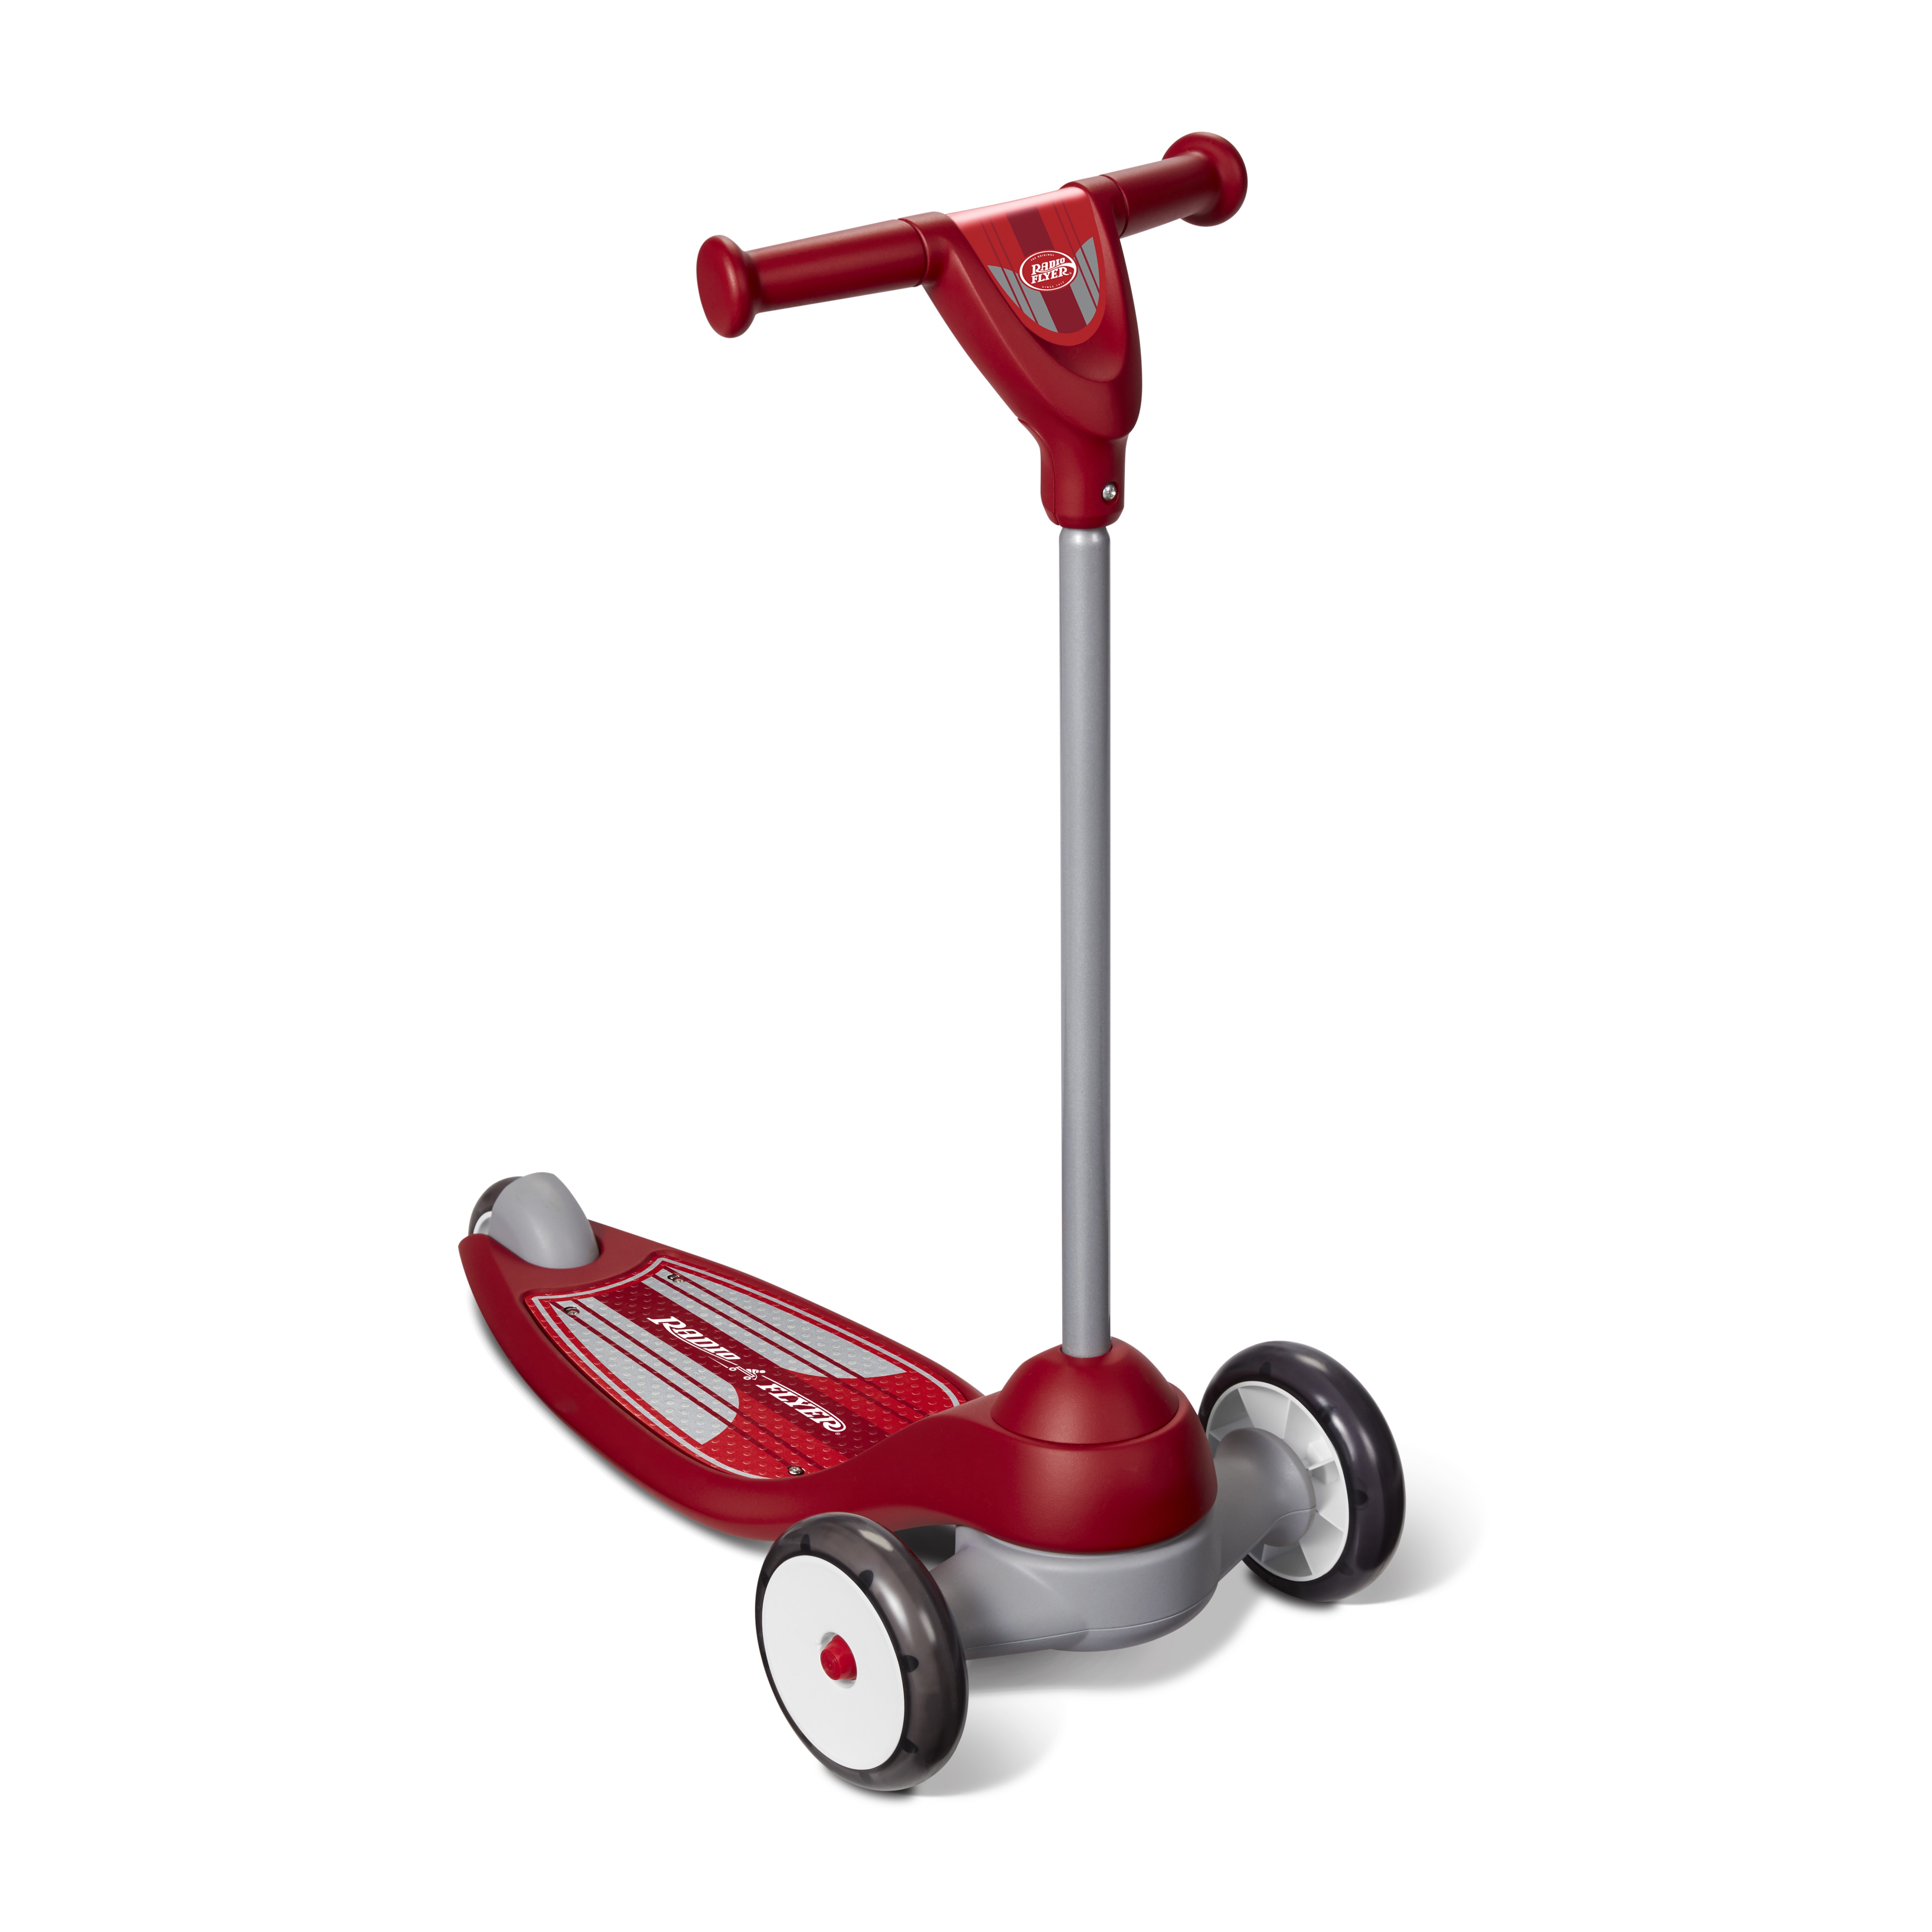 Radio Flyer, My 1st Scooter Sport, Three Wheel Scooter, Red - image 1 of 7